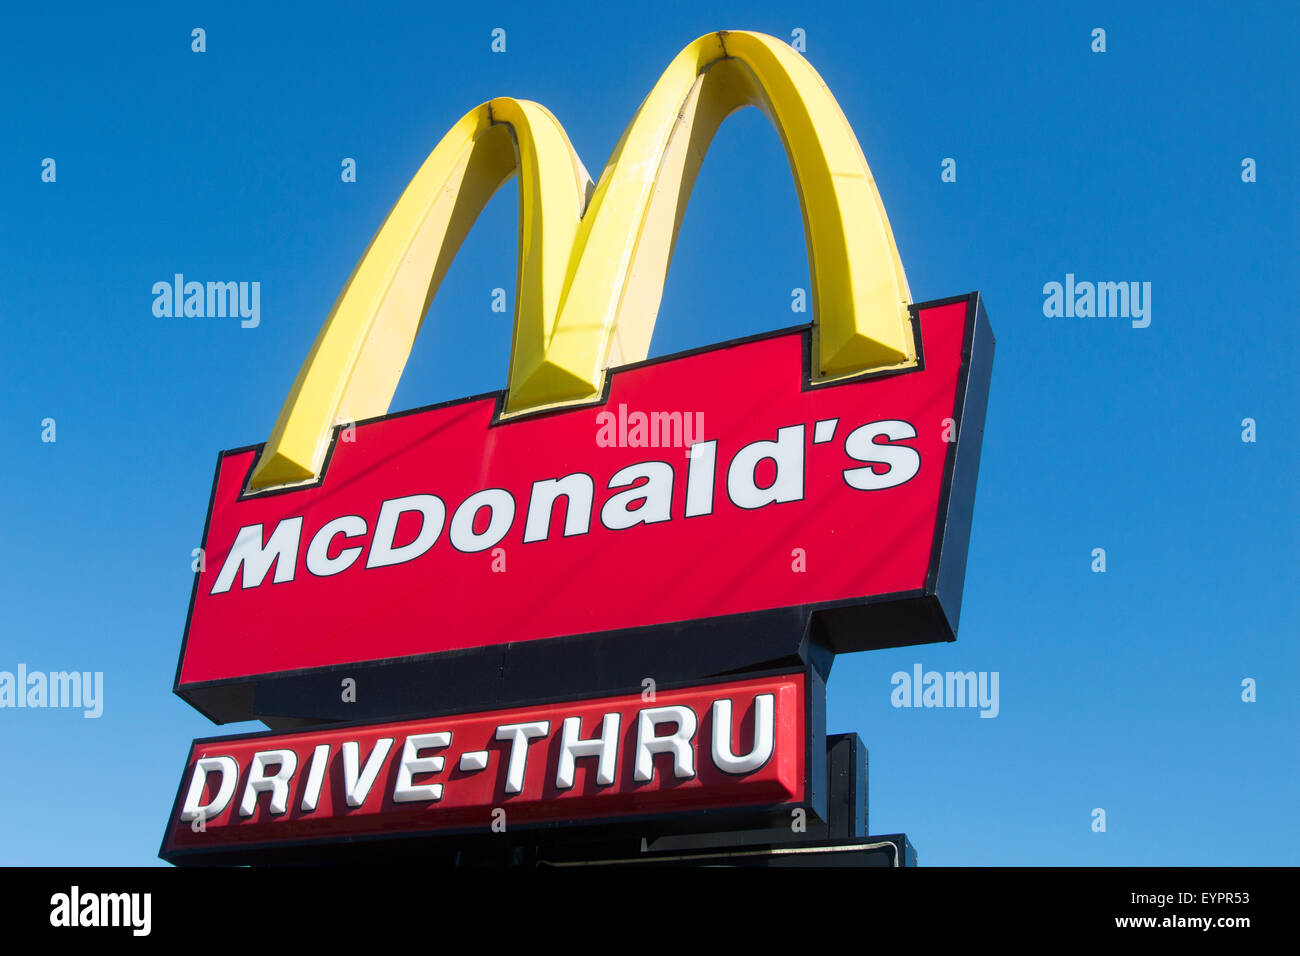 Mcdonalds famous sign and logo for drive thru meal on a deep blue sky,sydney,australia Stock Photo